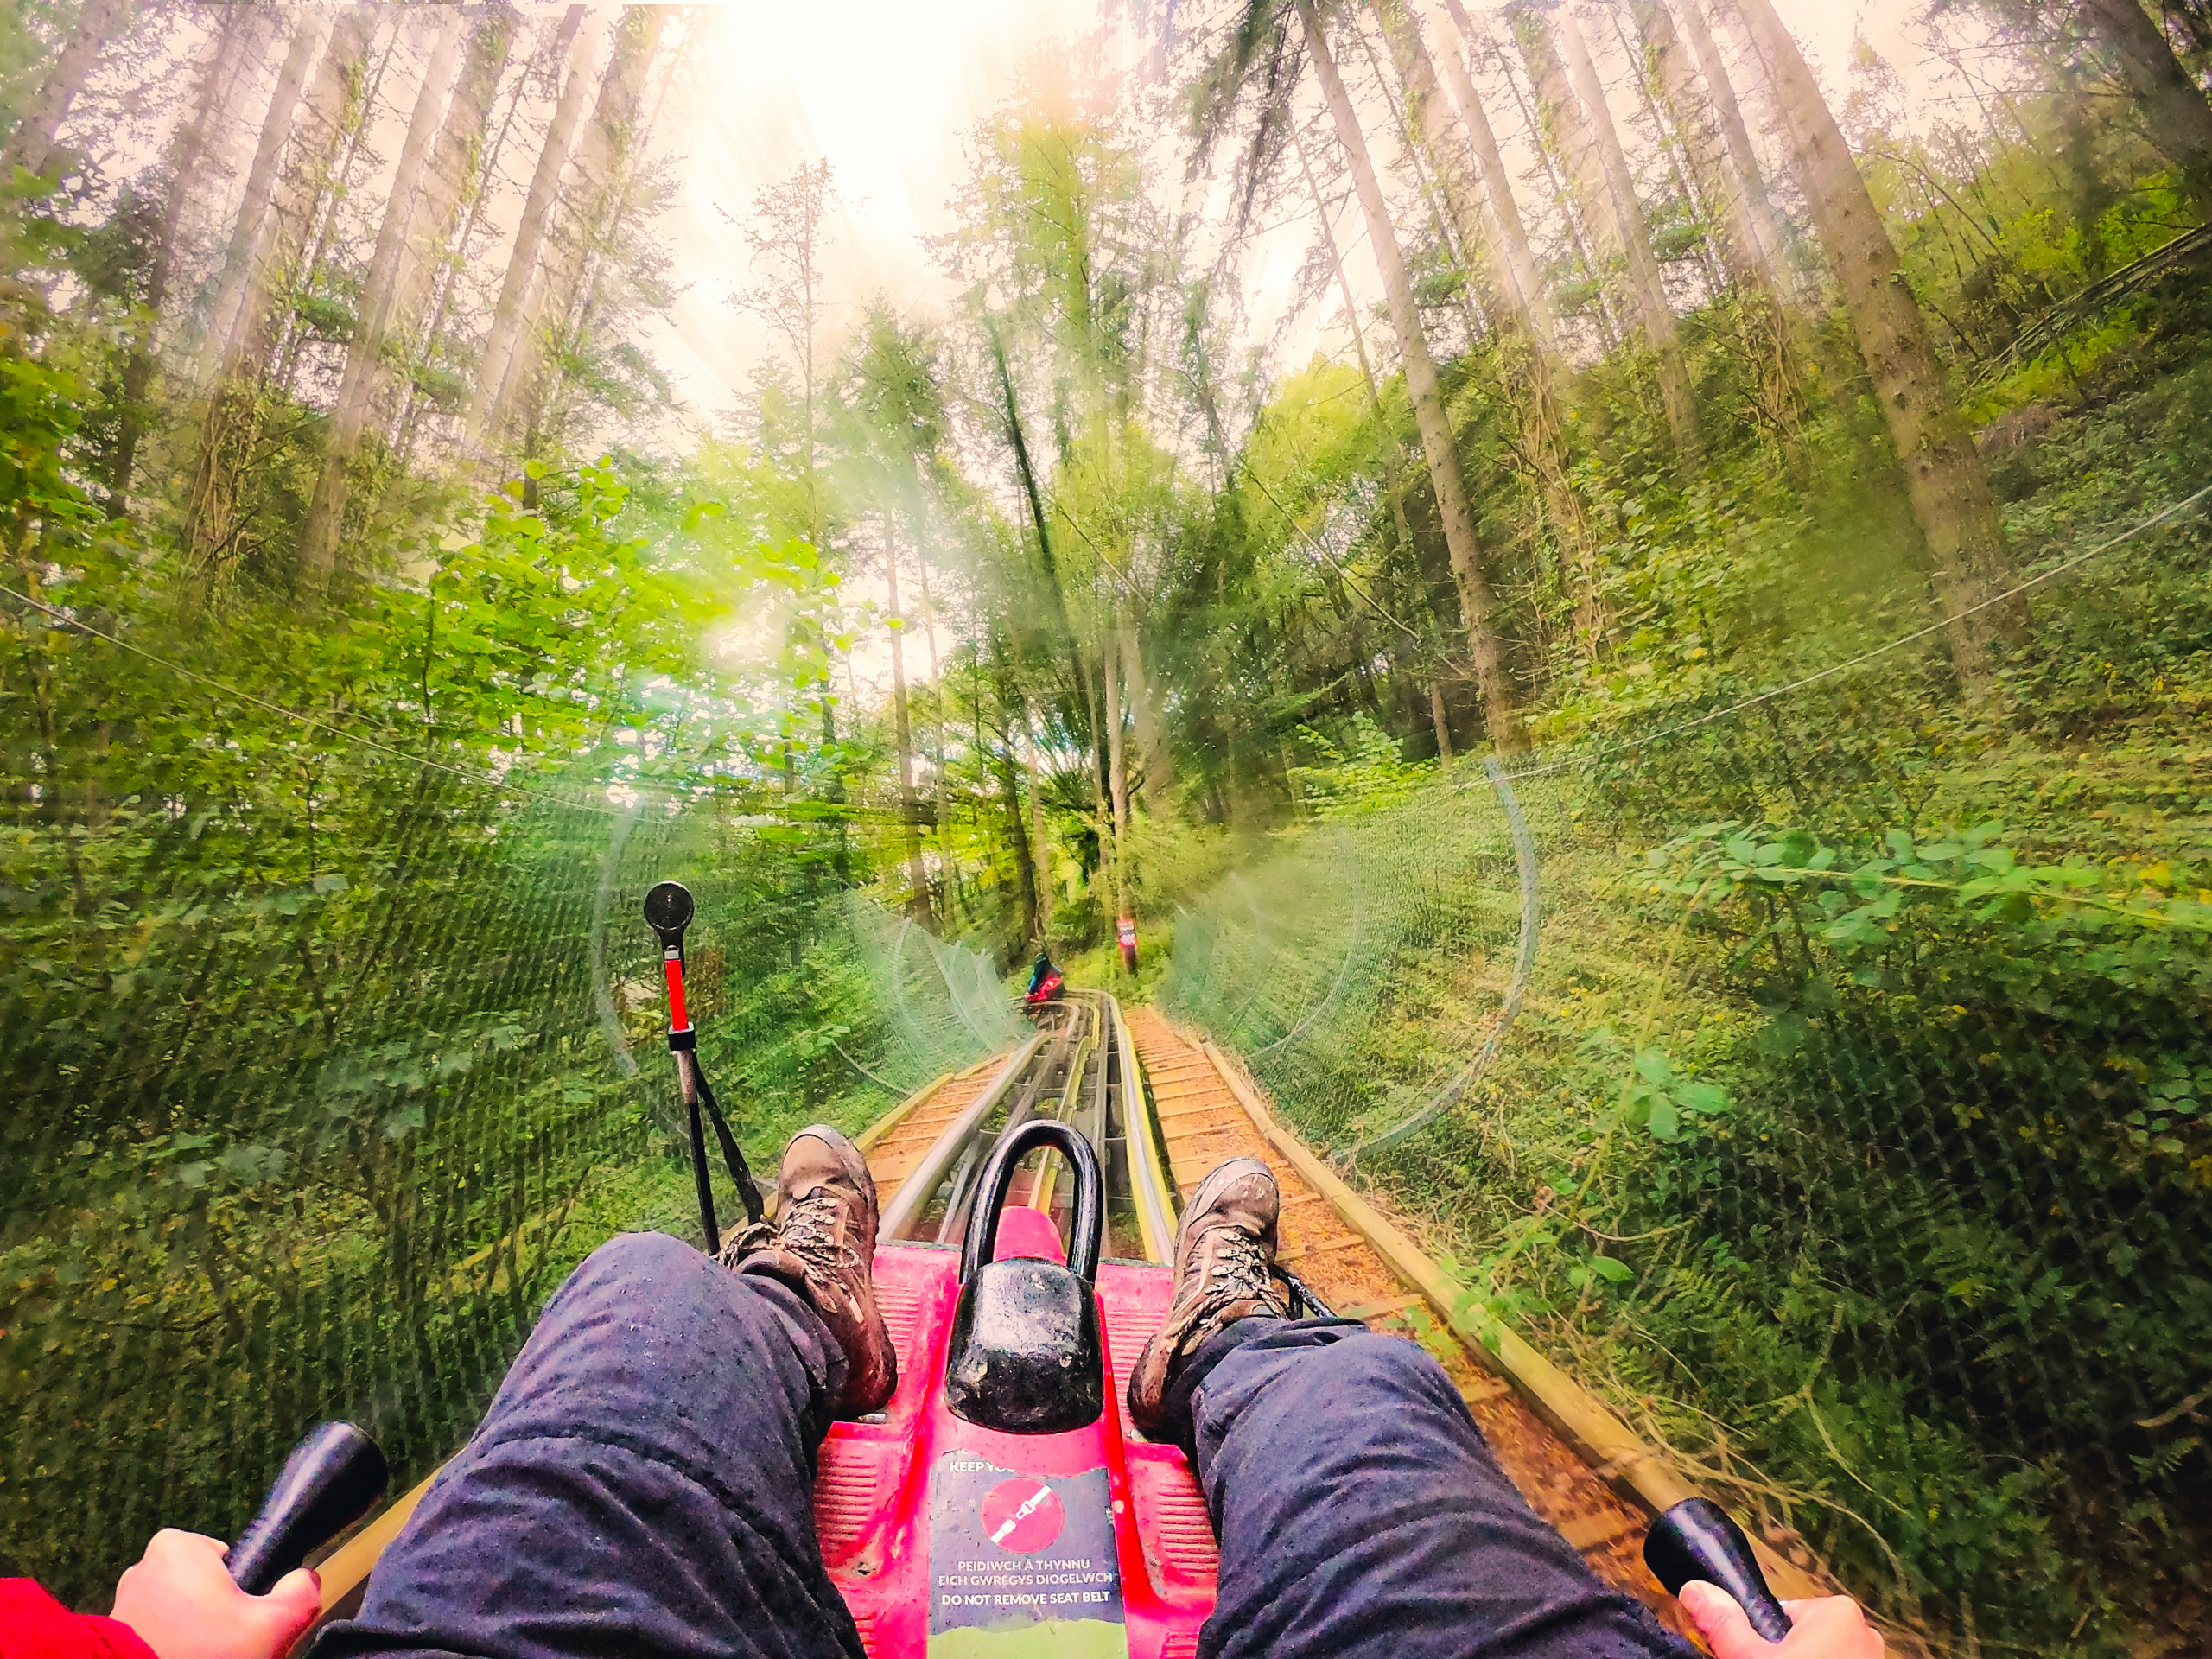 Manb riding the fforest coaster ride at Zip World in North Wales at Speed.